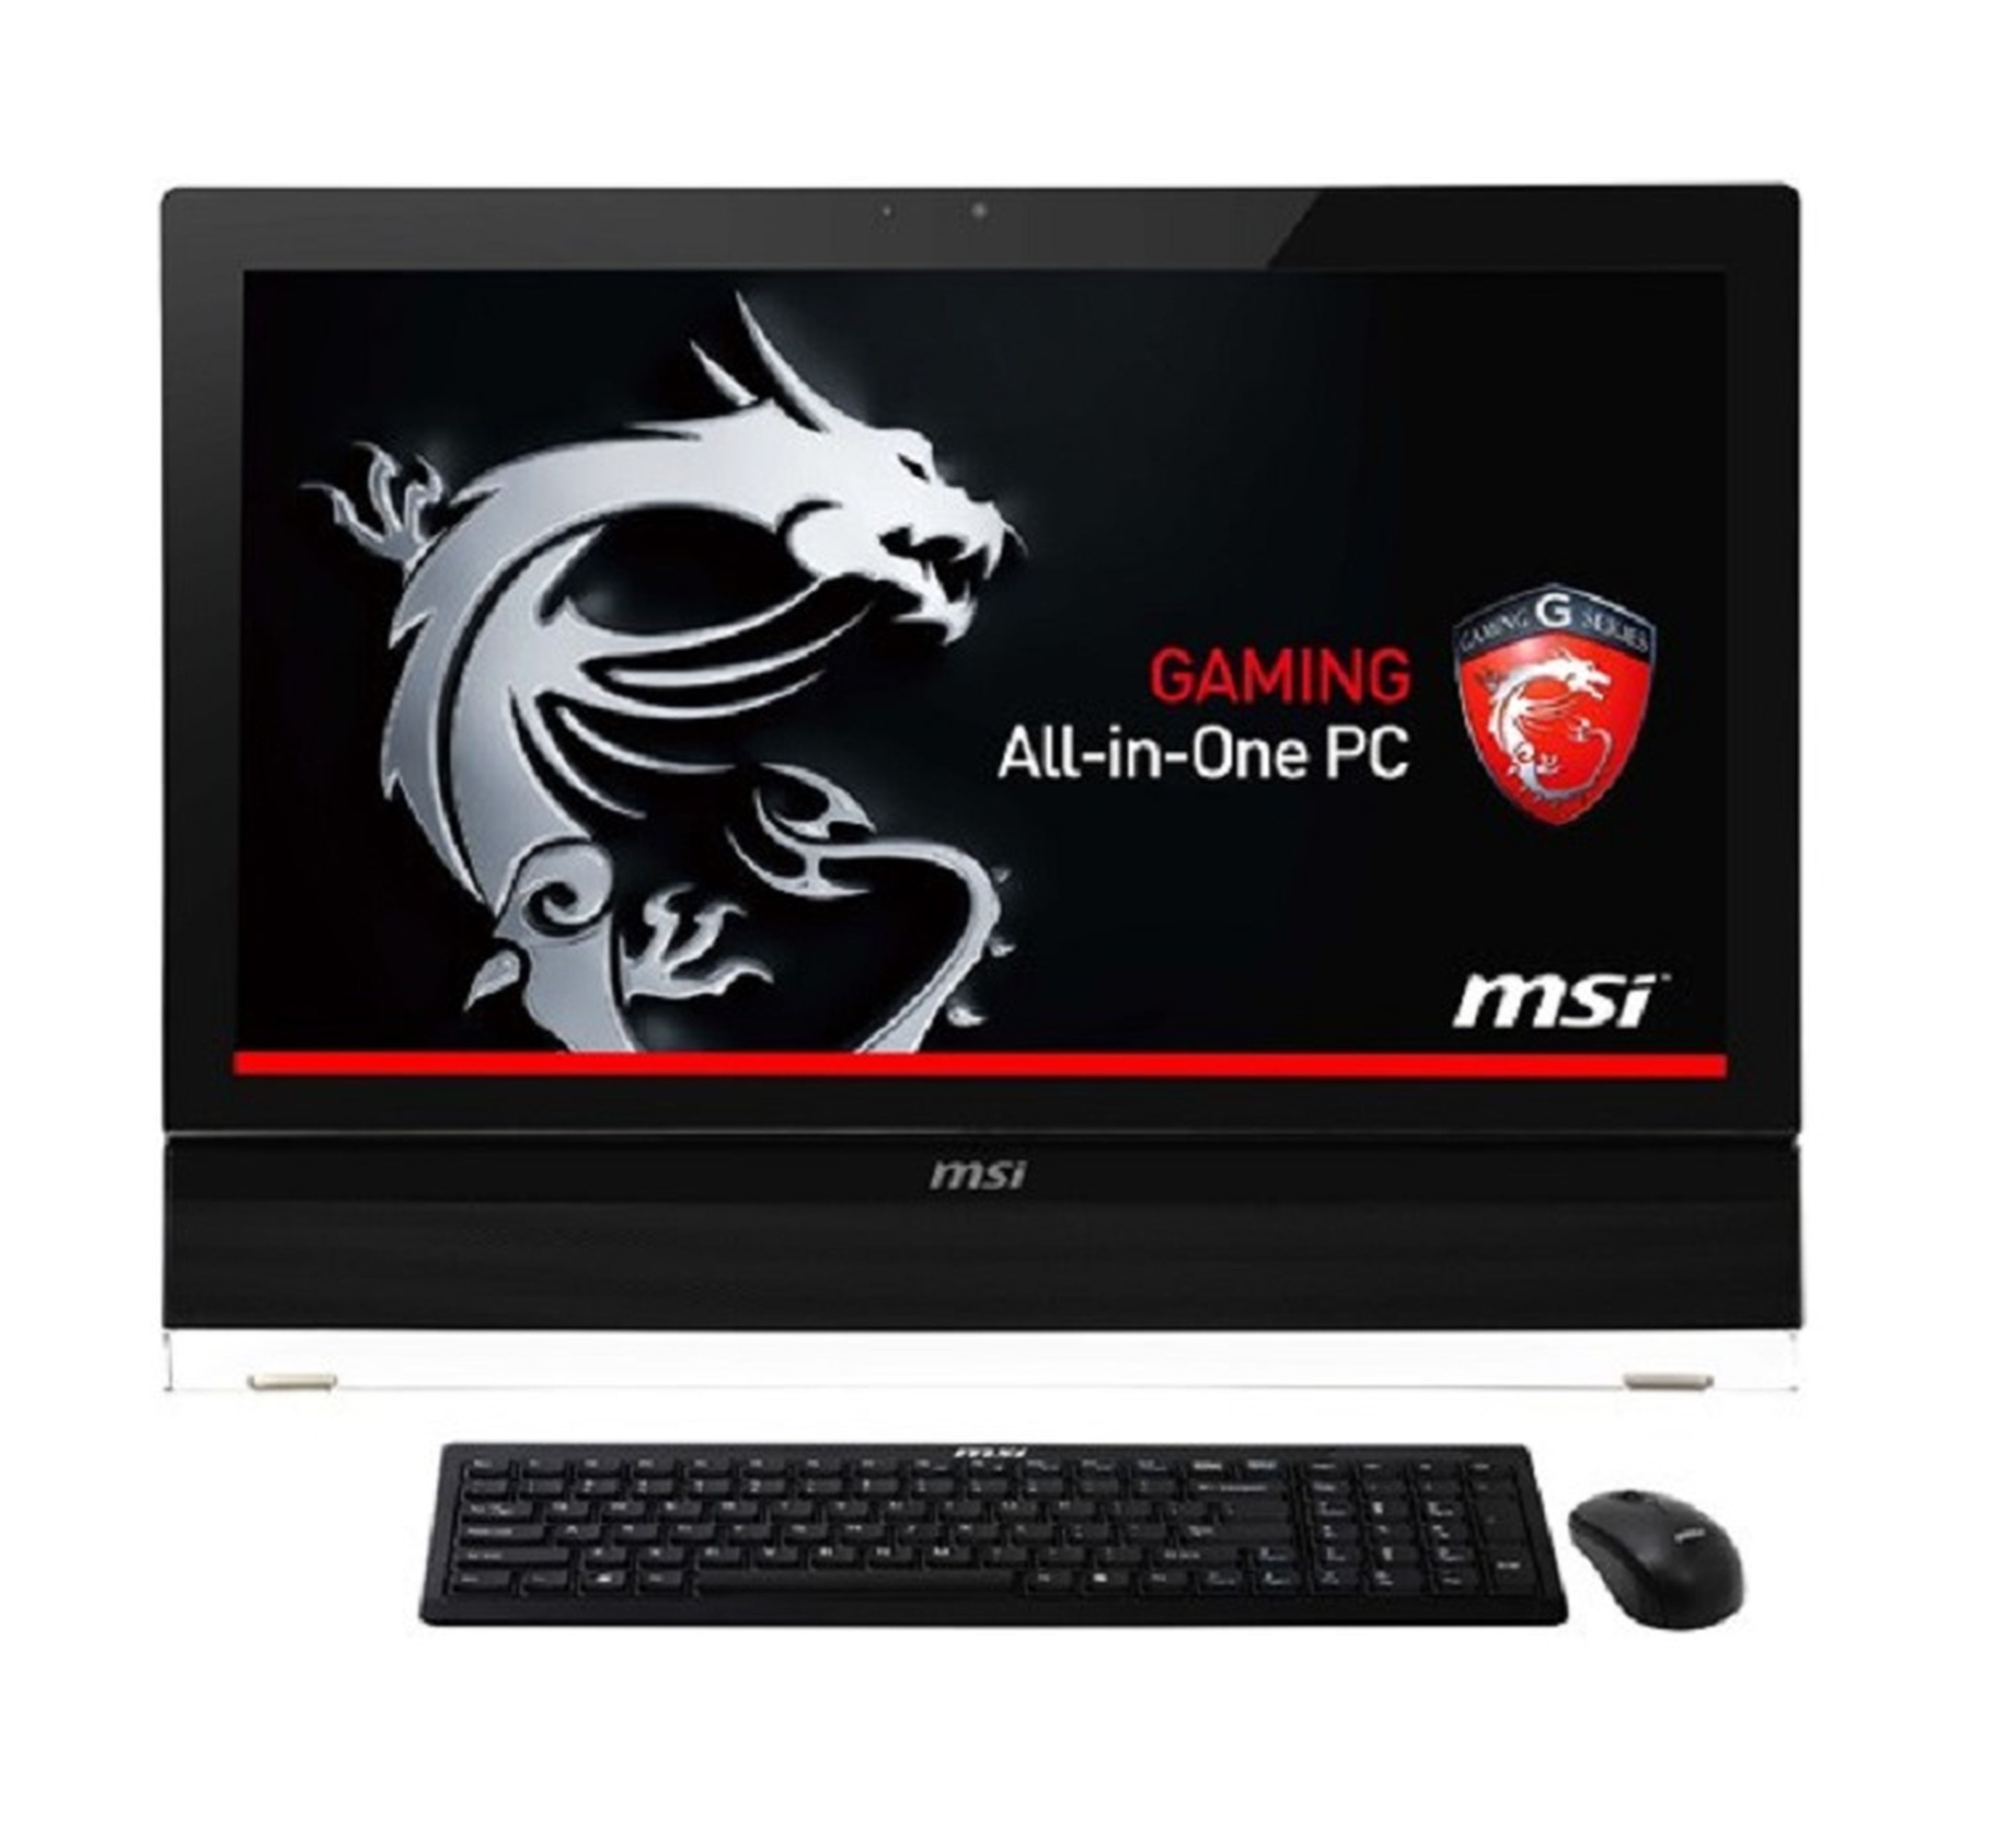 Gaming all in ones. MSI ag270 2qc. Моноблок MSI ag270 2qc. MSI ag2712a. MSI 1155 моноблок.